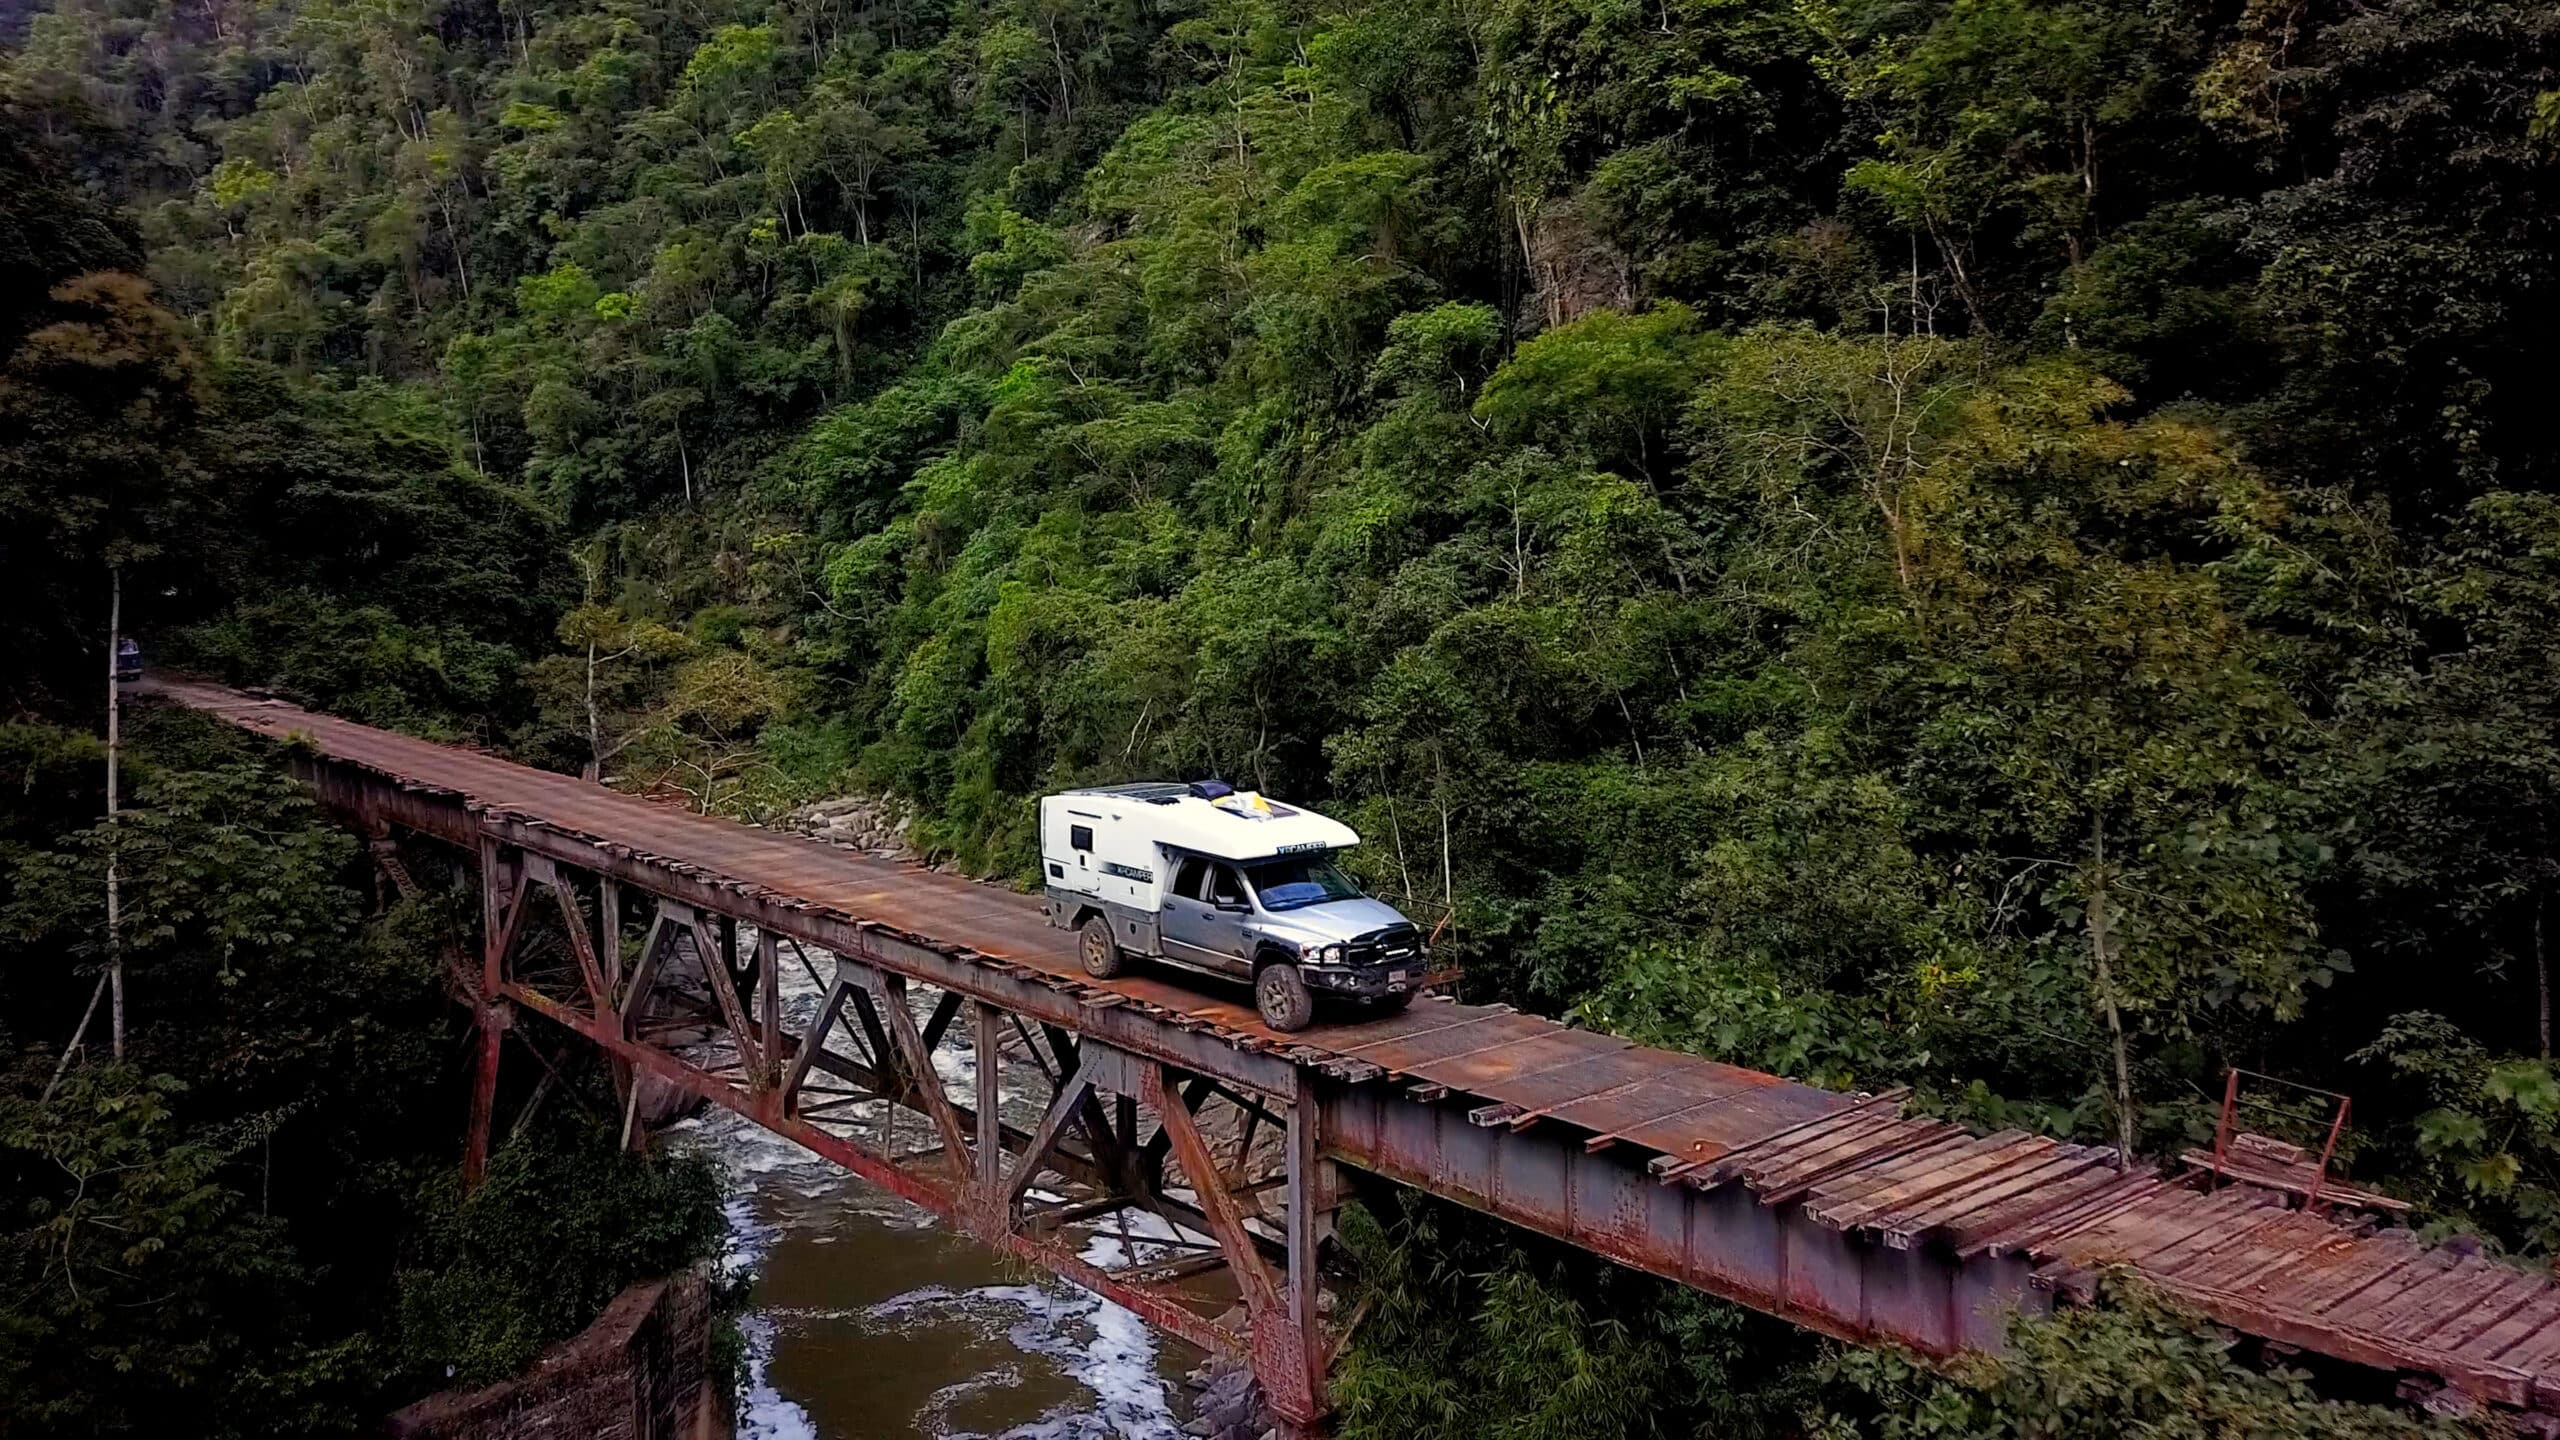 A Nimble overlanding truck is driving over a bridge in the forest.